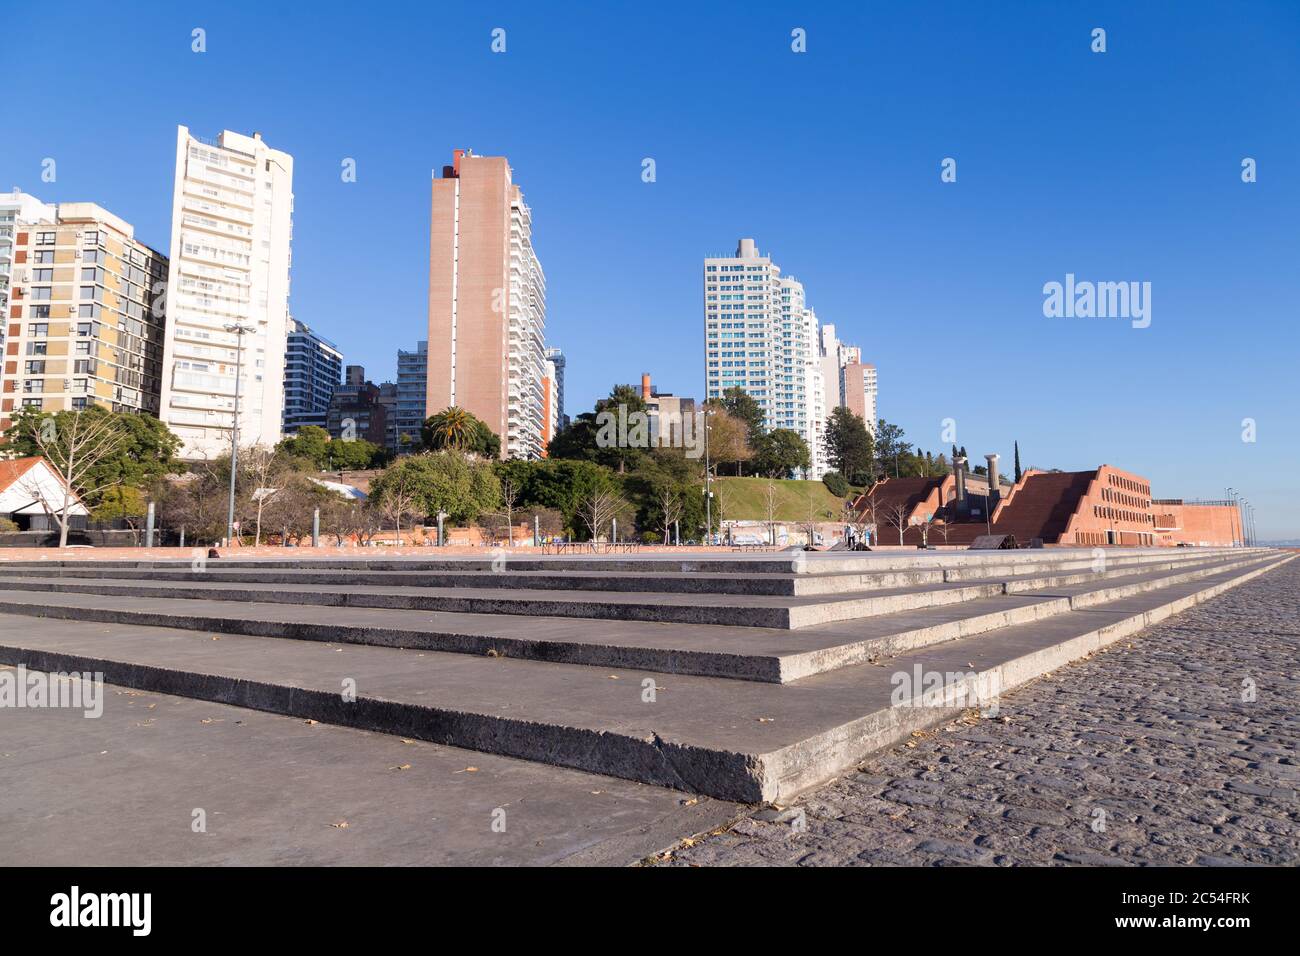 ROSARIO, ARGENTINA - JULY 6, 2019: Spain Park placed at the coast of Parana river in Rosario. Panoramic view. The city at the background. Stock Photo